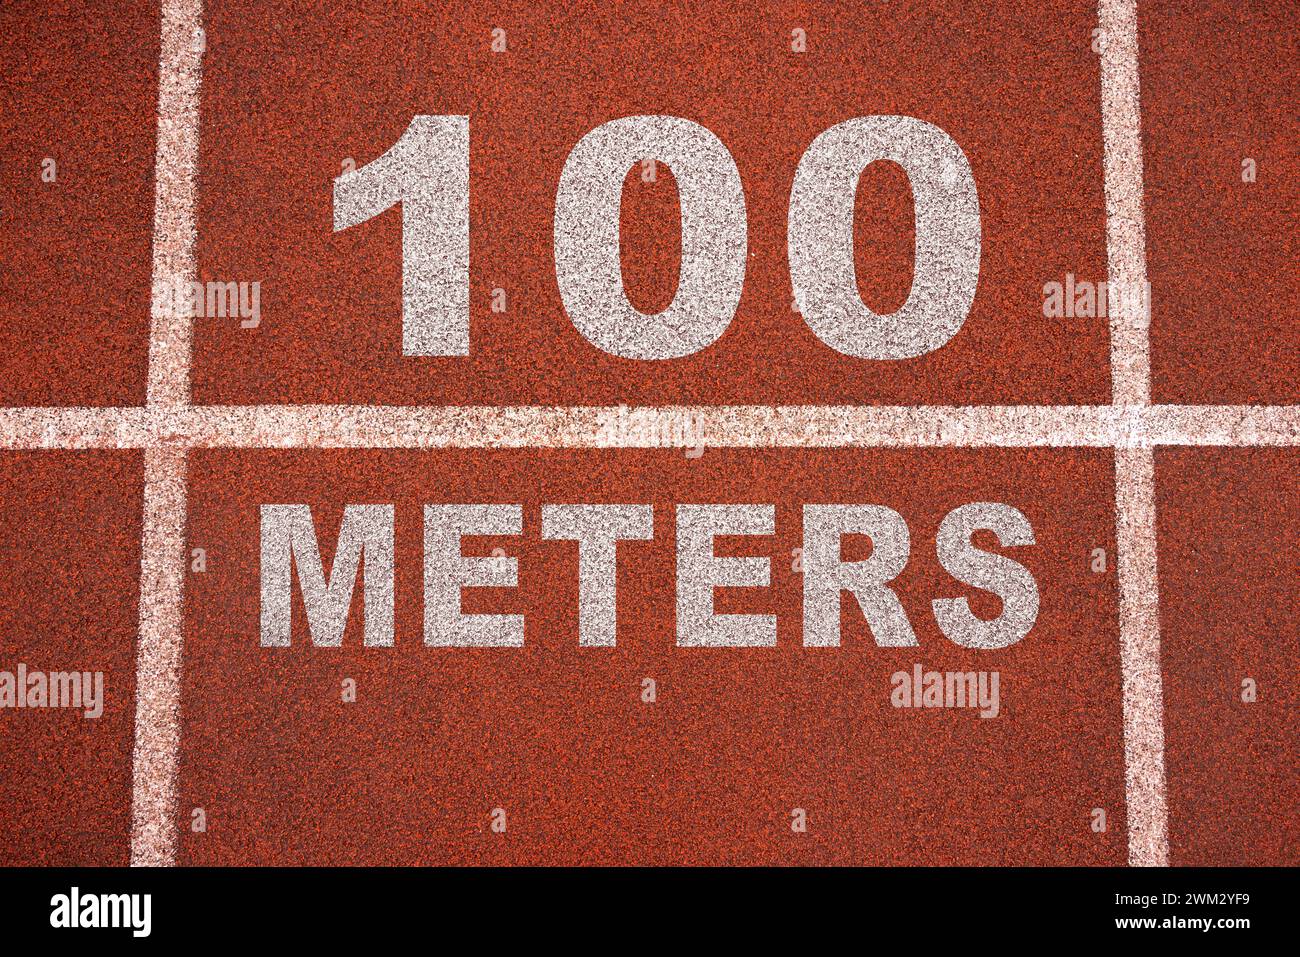 Running track 100 meters concept. Concept for olympic games or reaching business goals. Stock Photo